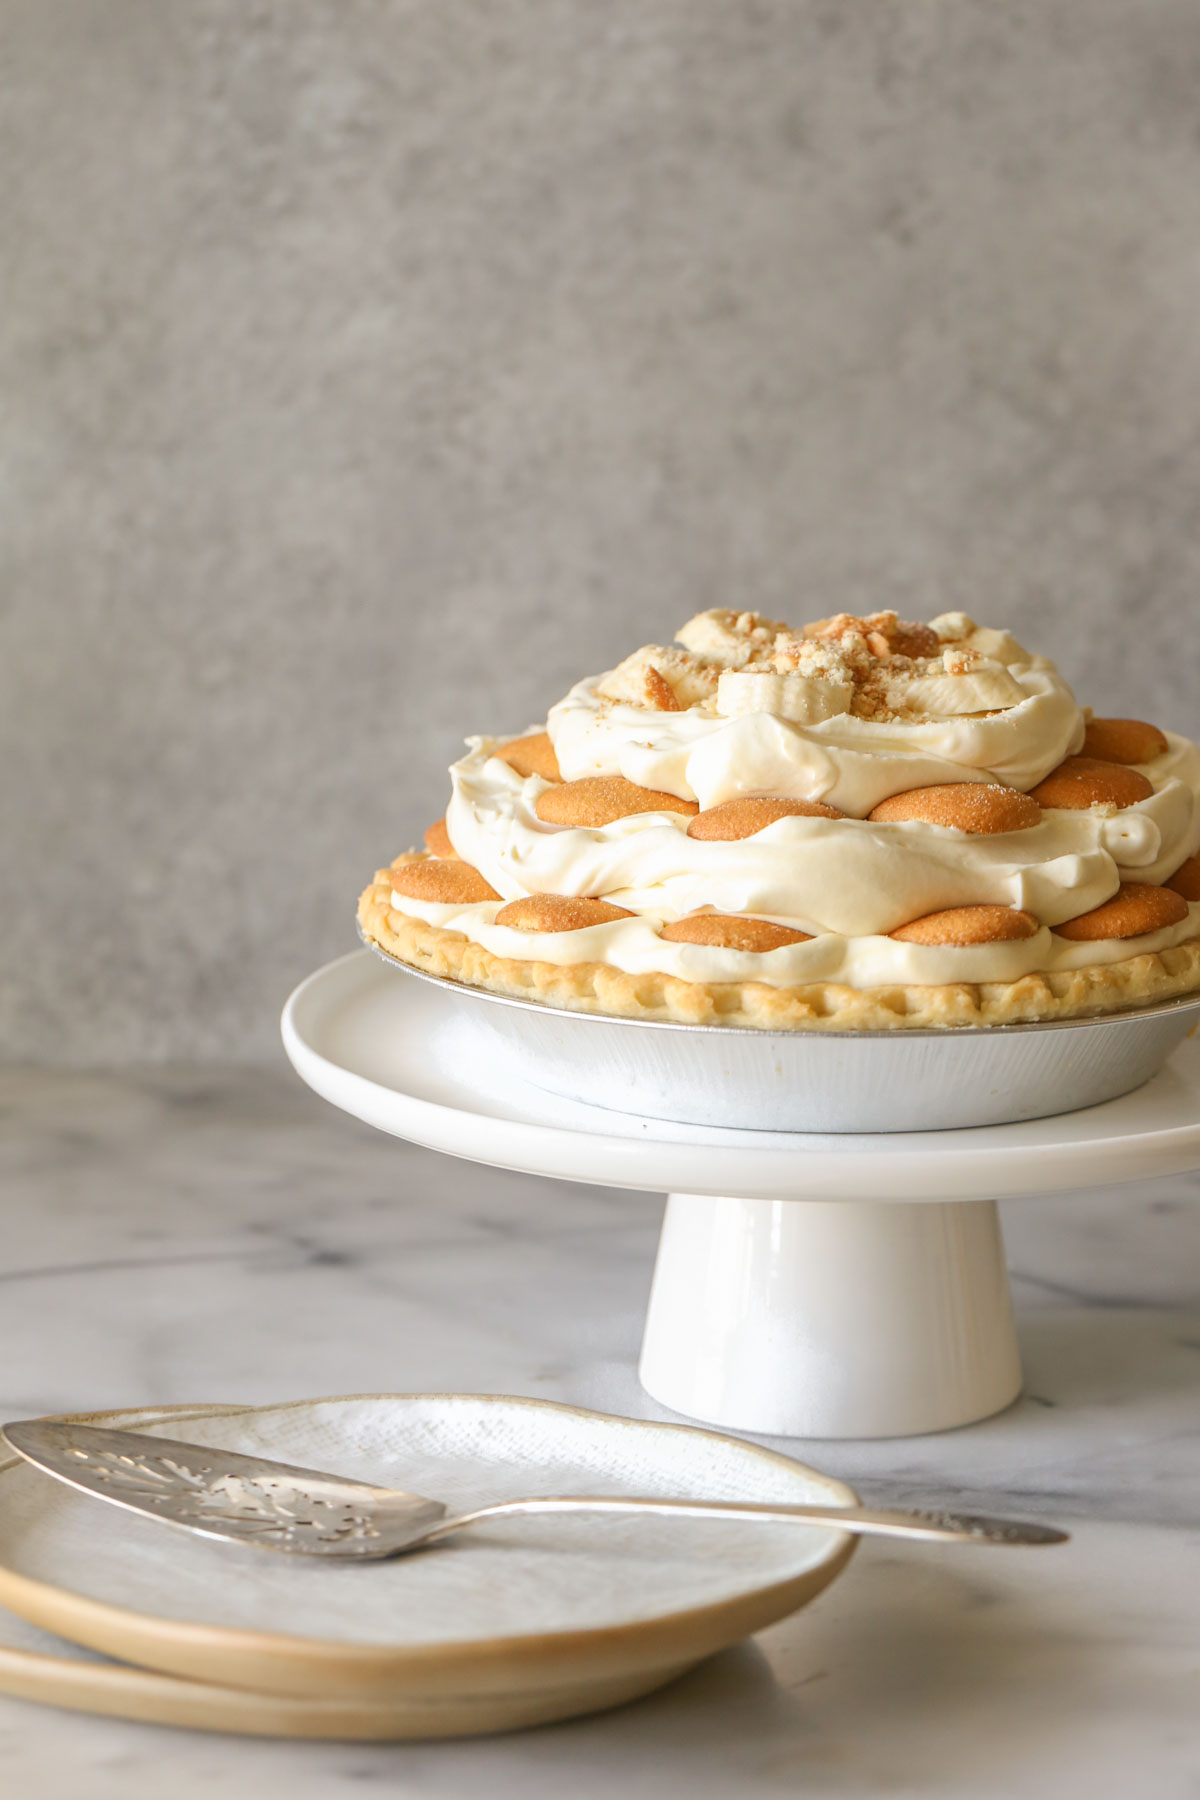 Mile High Banana Pudding Pie on a white cake stand, with two plates and a pie serving utensil next to the cake stand.  